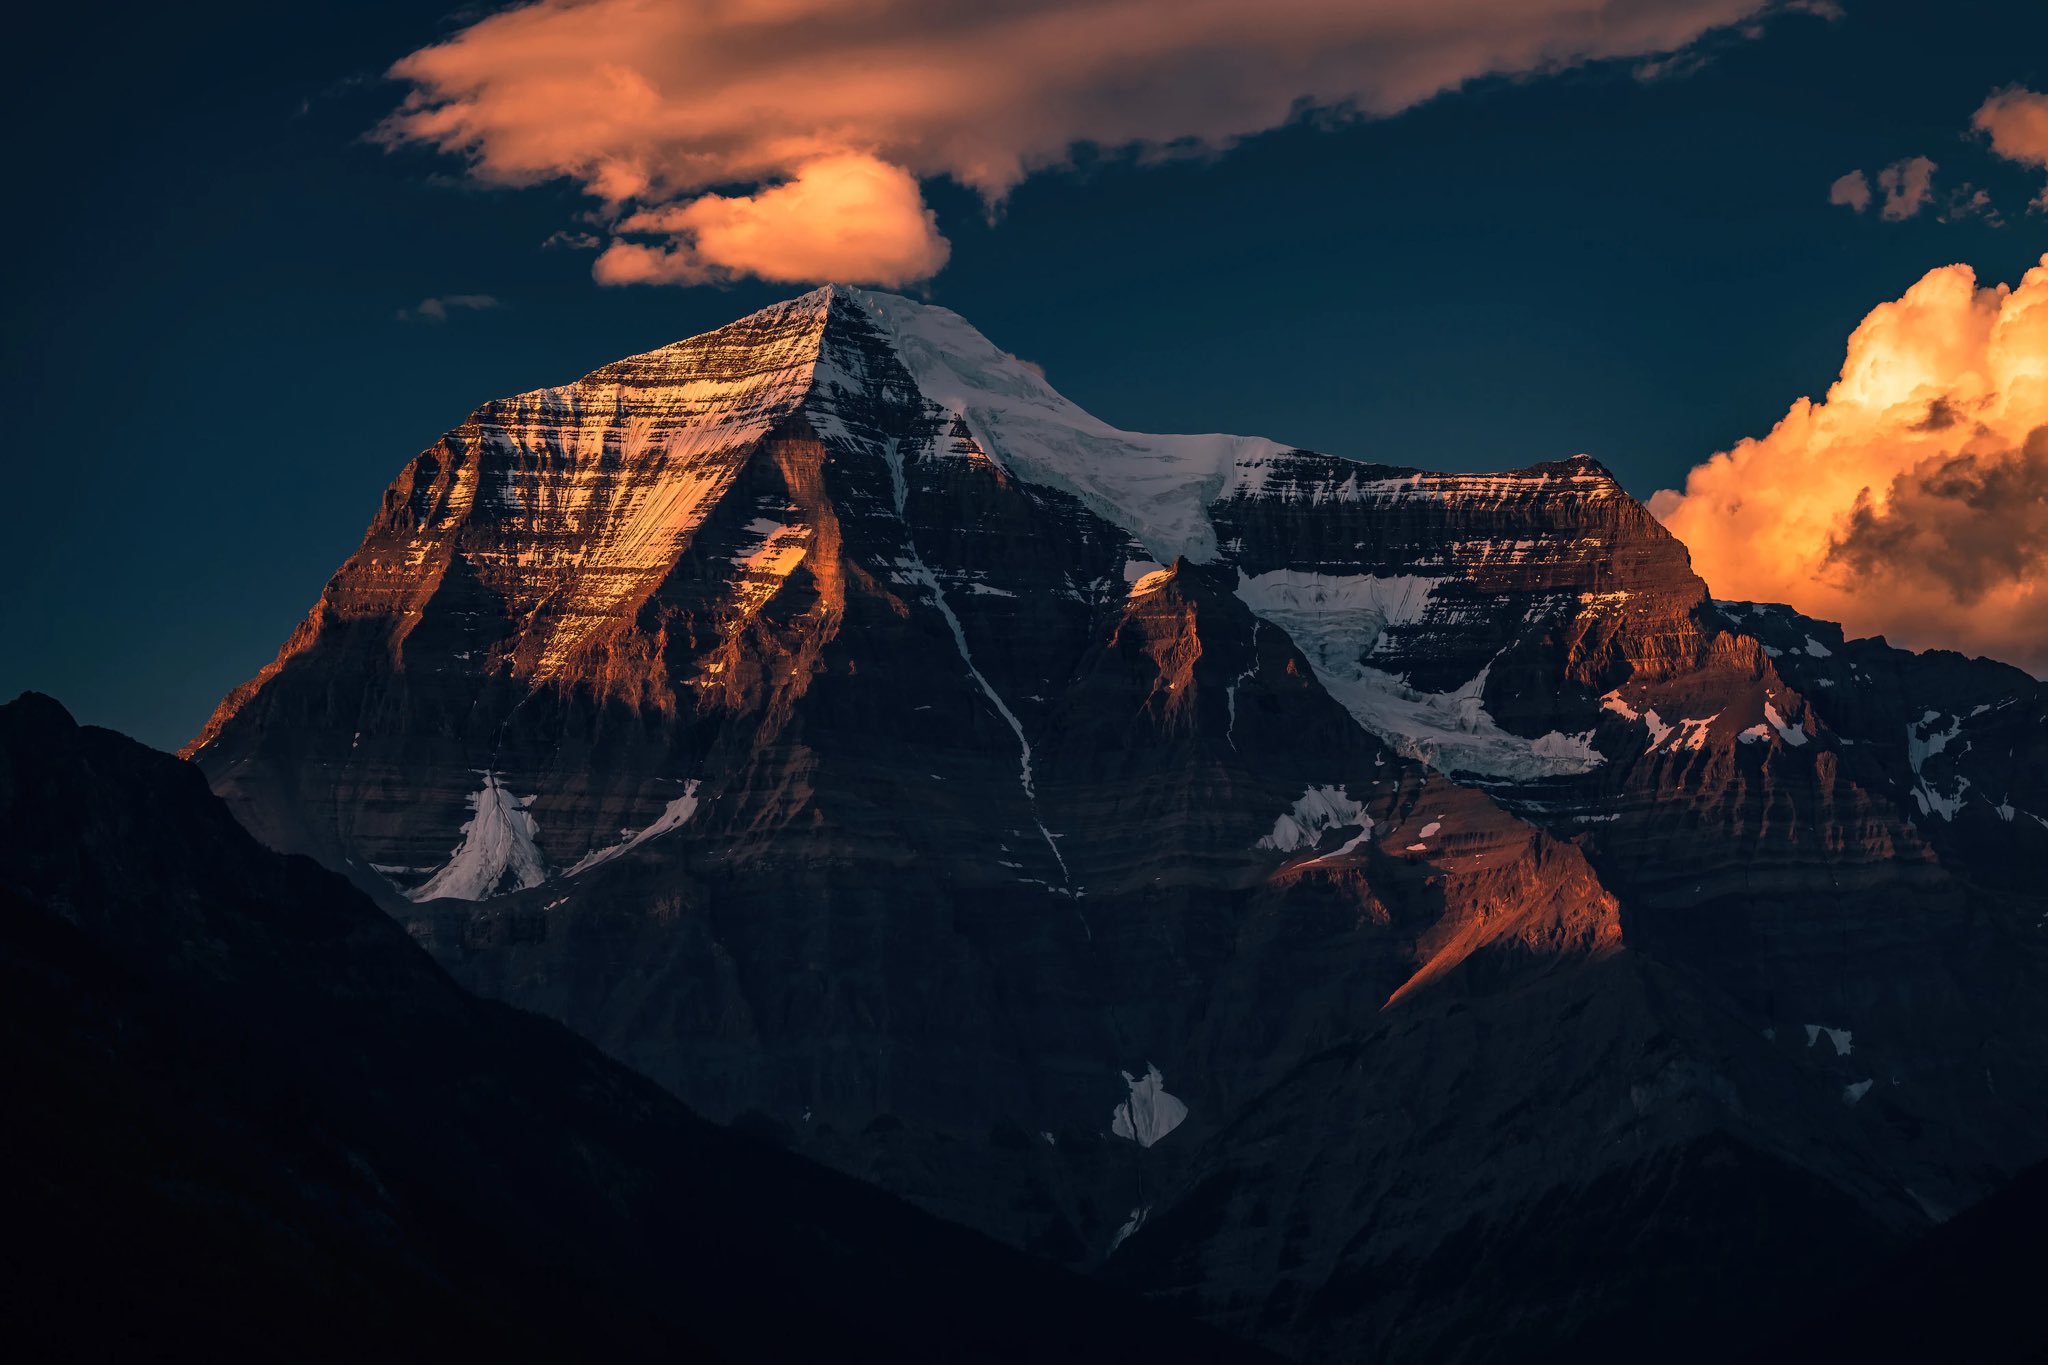 General 2048x1365 nature clouds sky landscape mountains snowy mountain sunlight sunset glow snow Mount Robson low light